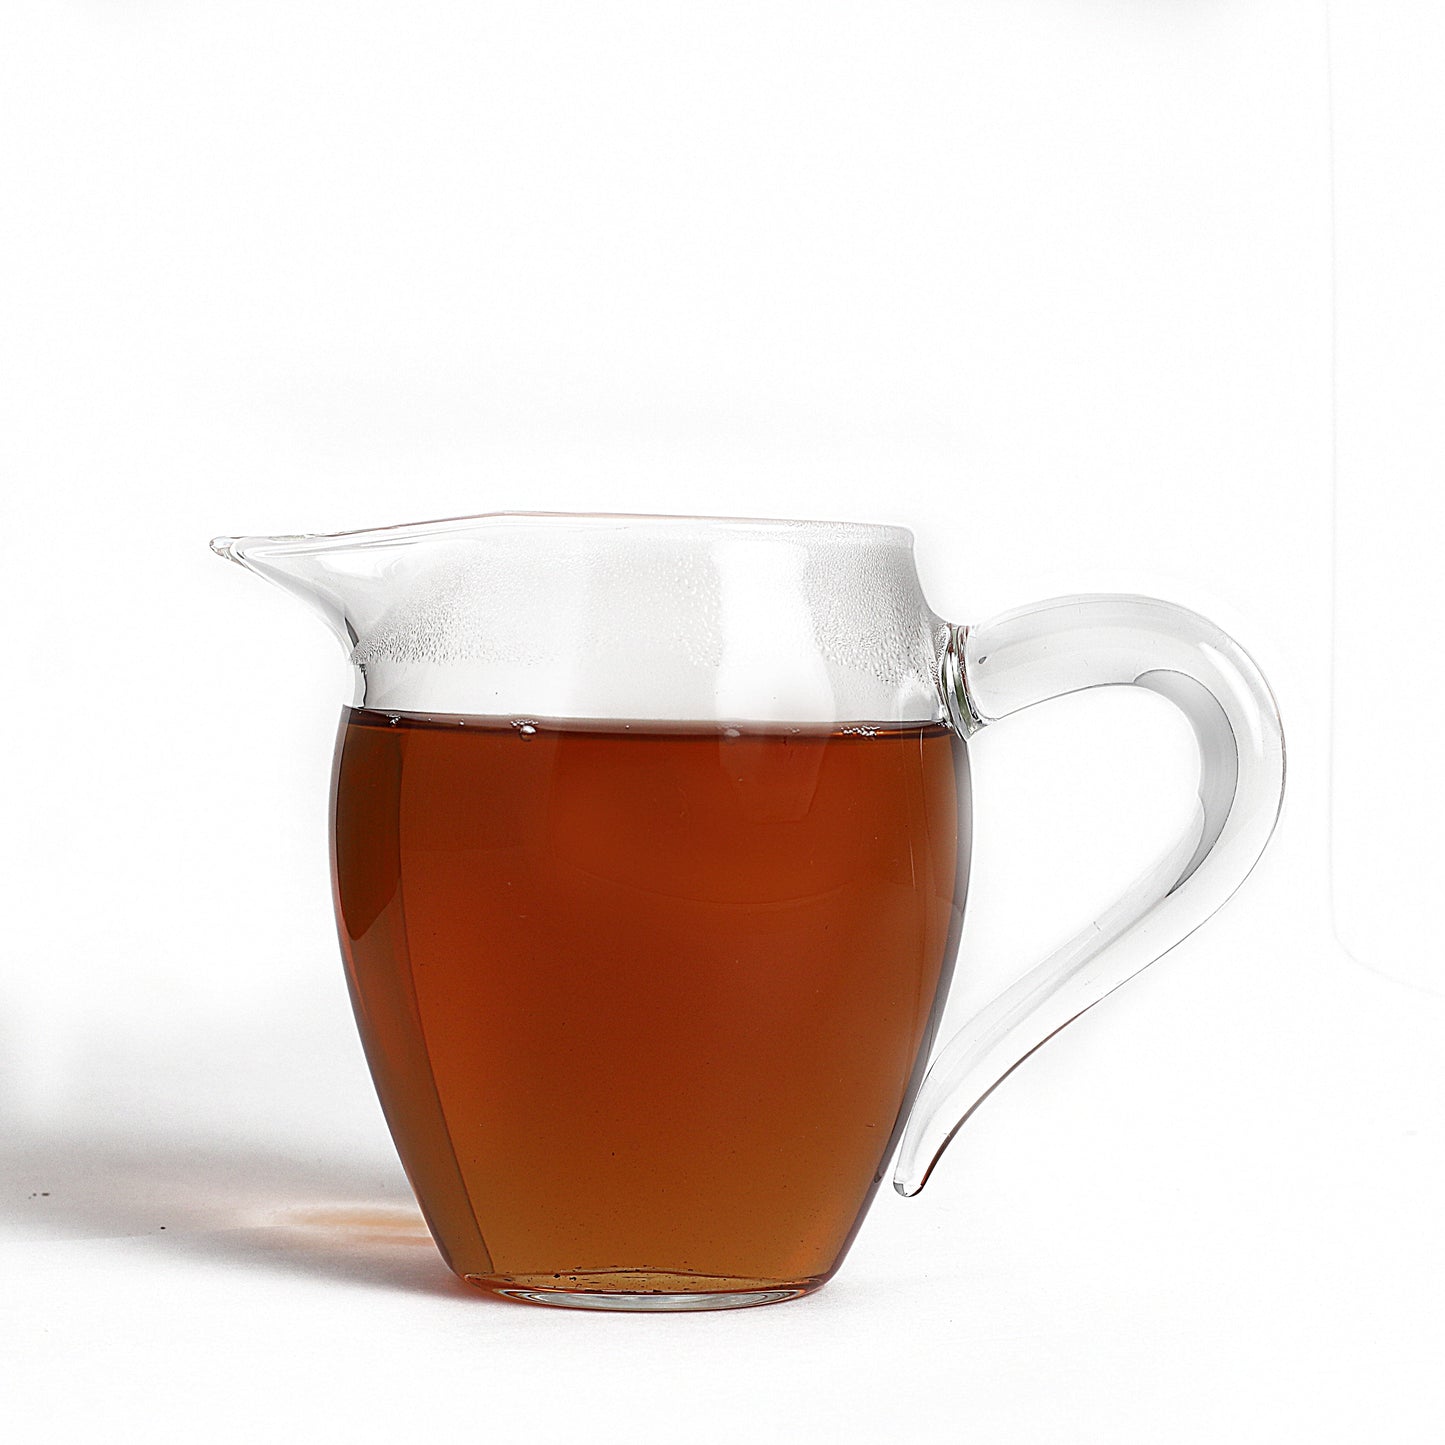 Fairness Cup (Tea Pitcher) by Tea and Whisk - Lotus and Willow